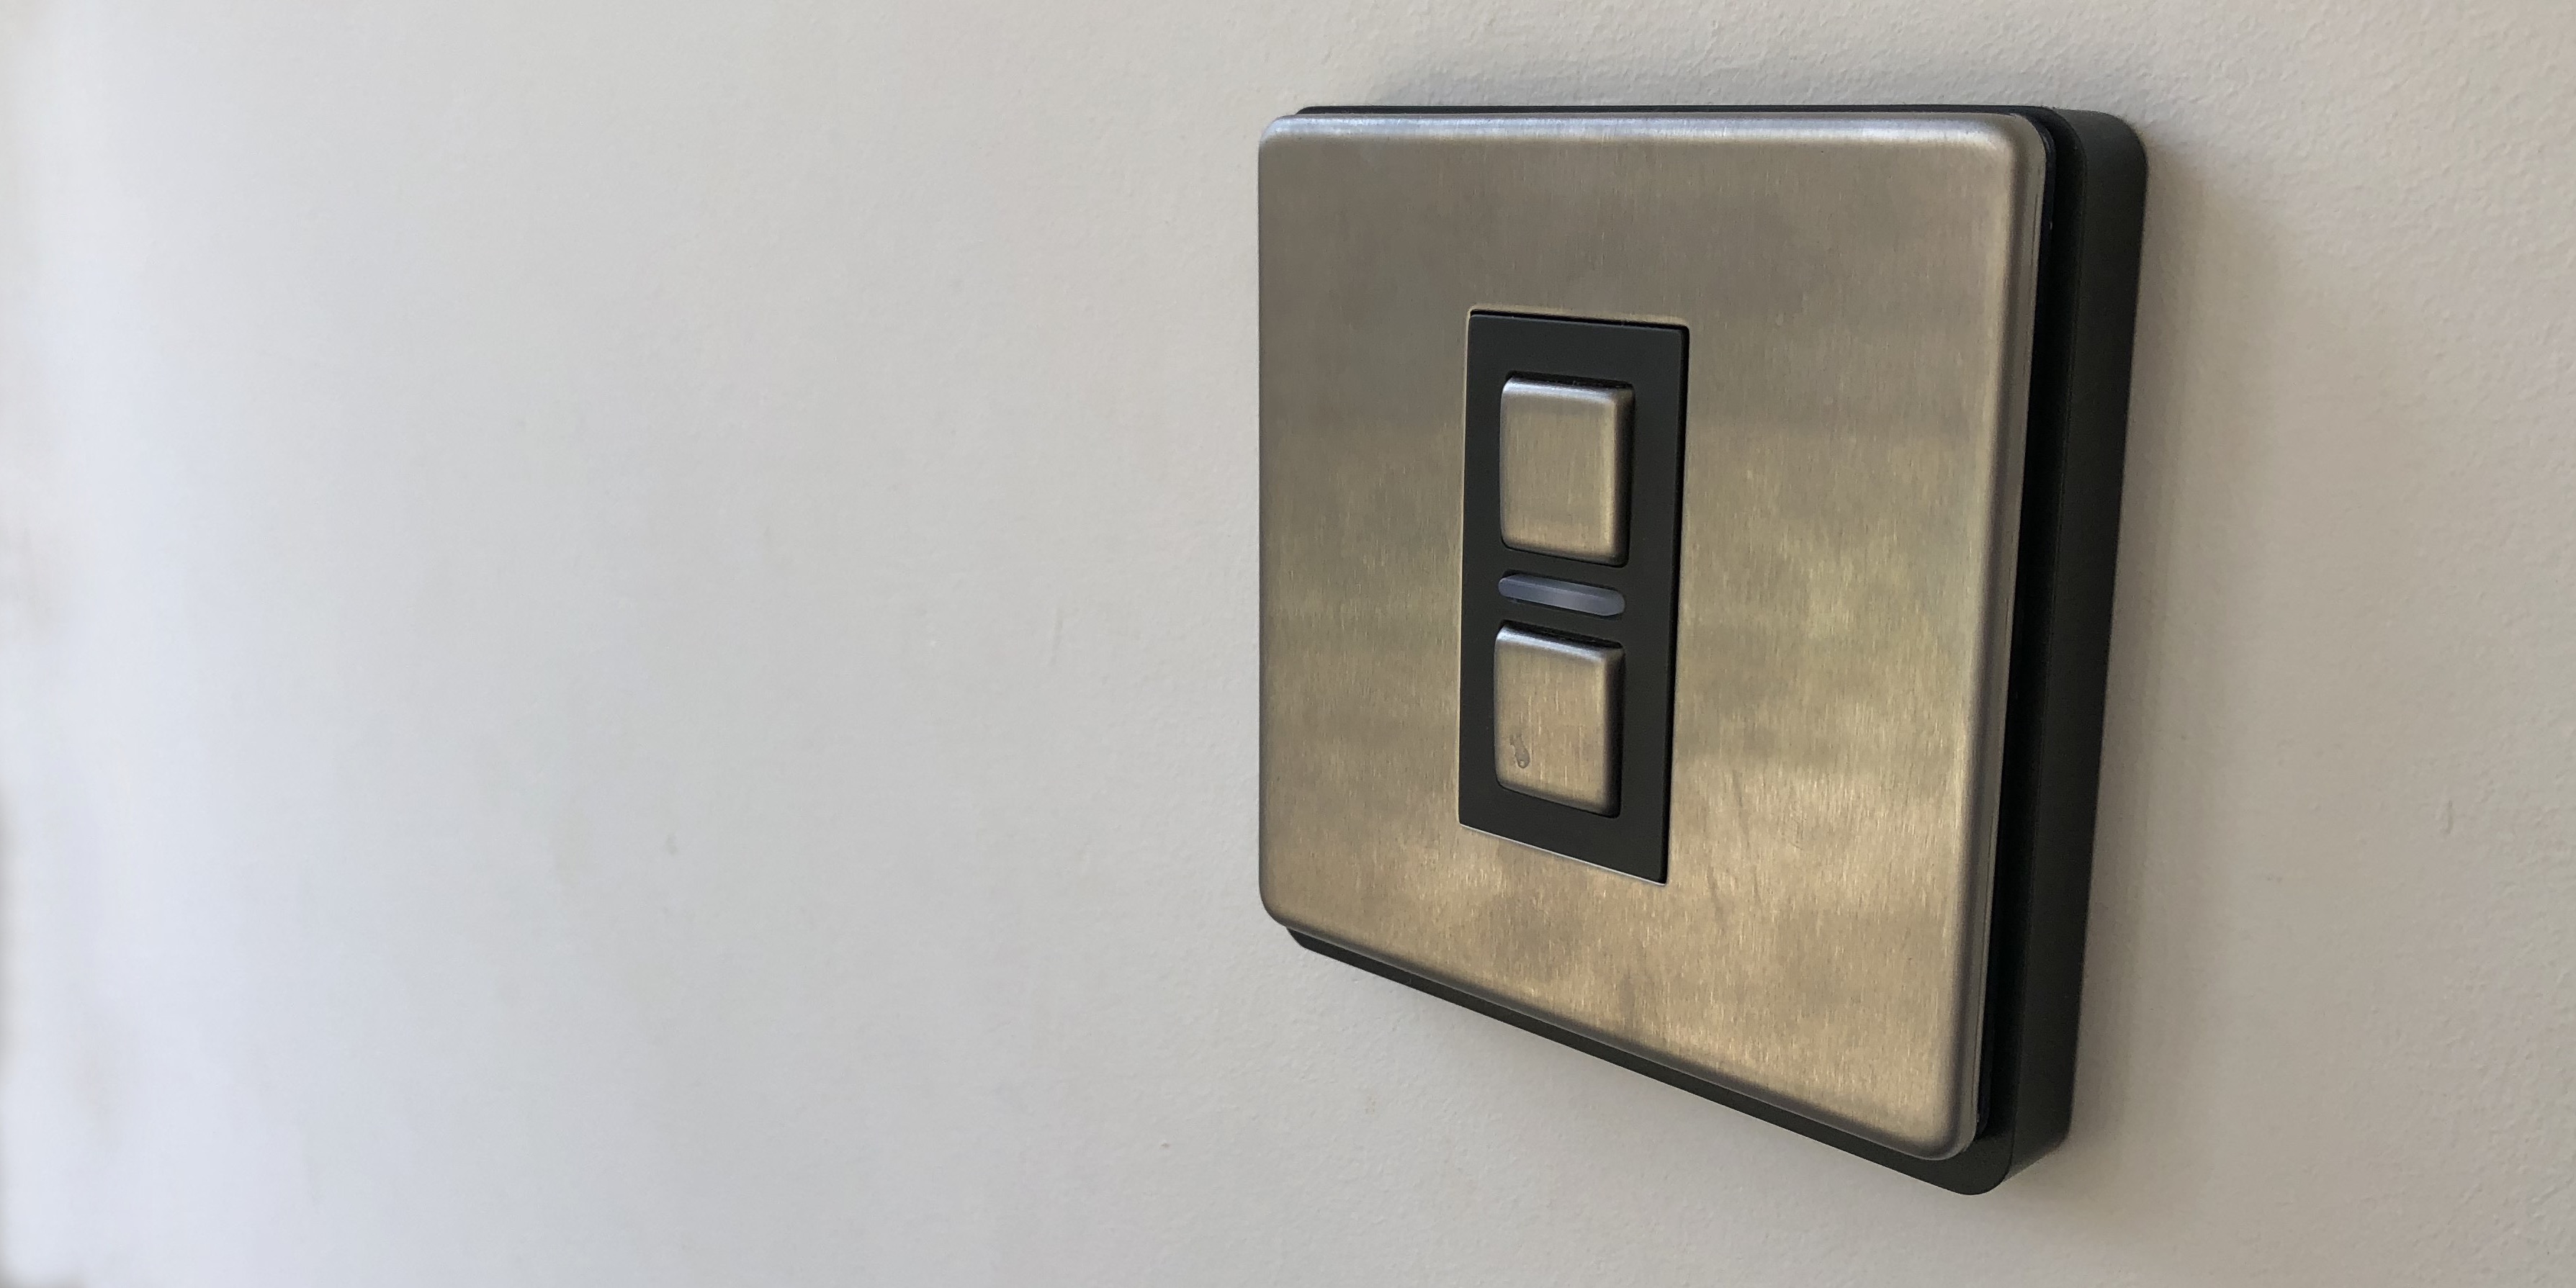 Review: Lightwave Light Switch, the best UK solution for lighting - 9to5Mac